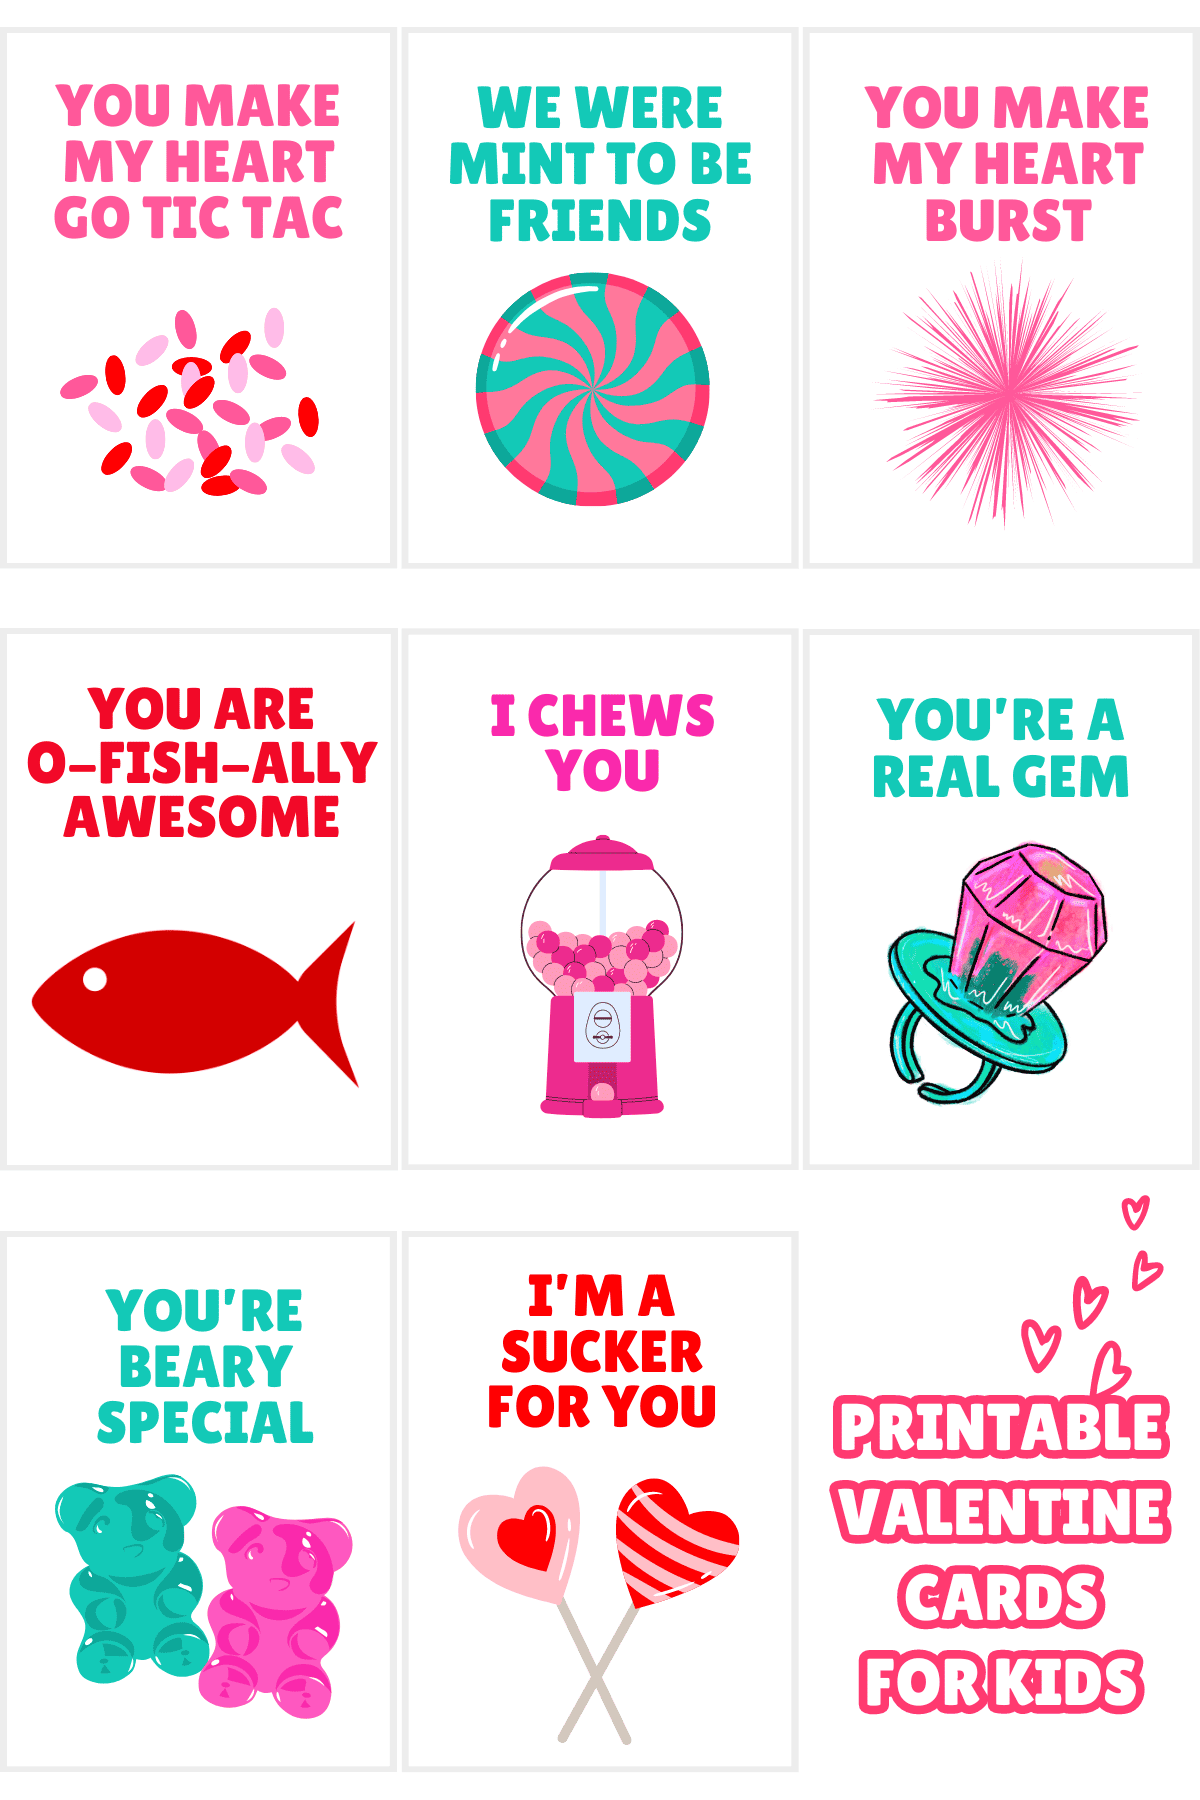 Printable Valentine's Day cards for kids.